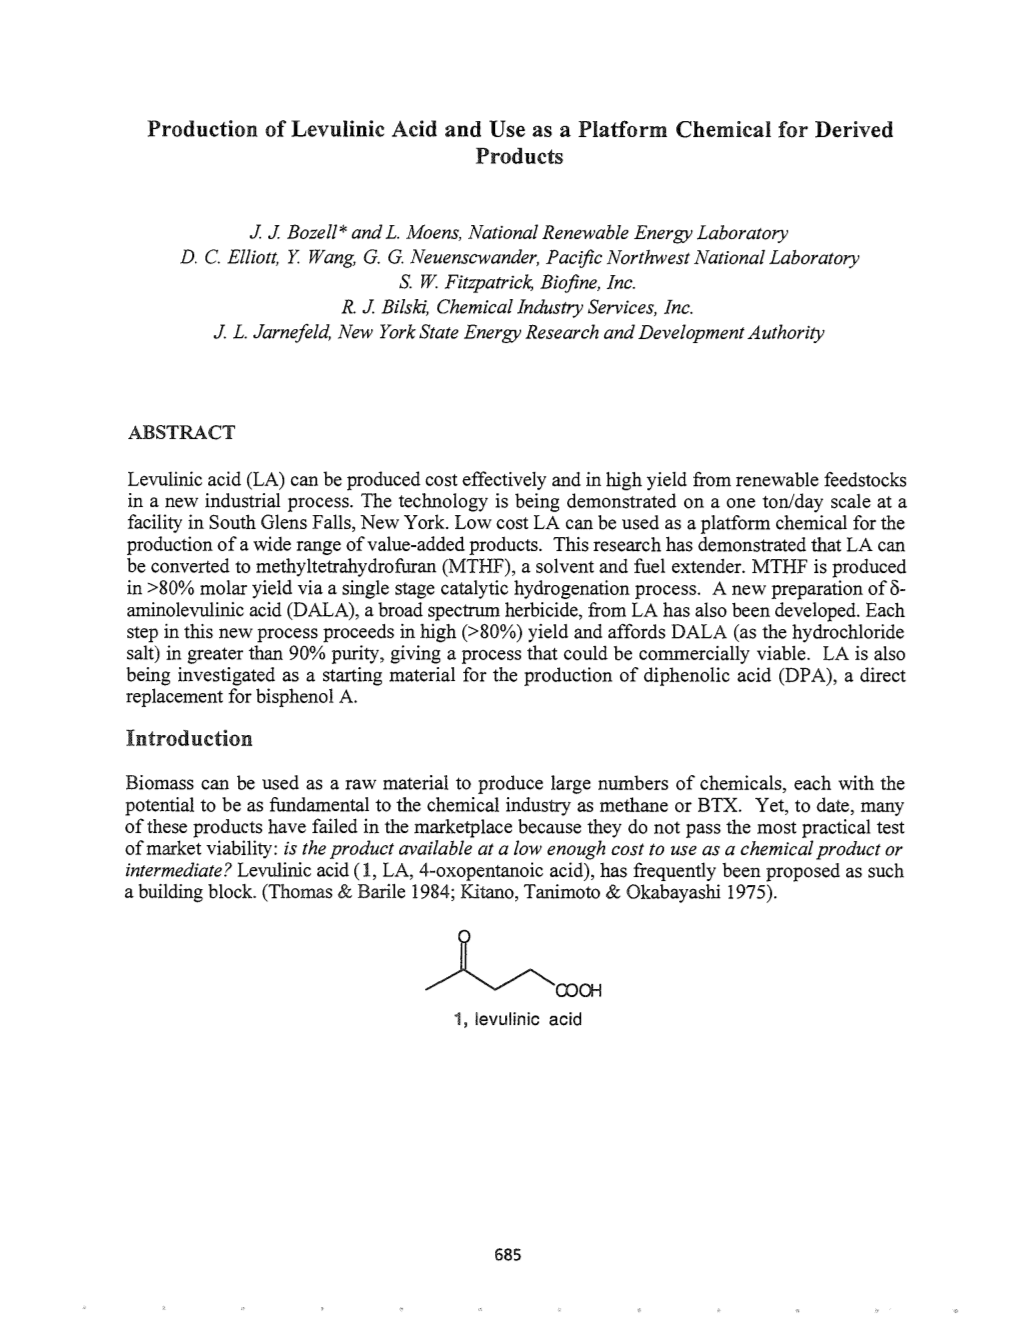 Production of Levulinic Acid and Use As a Platform Chemical for Derived Products